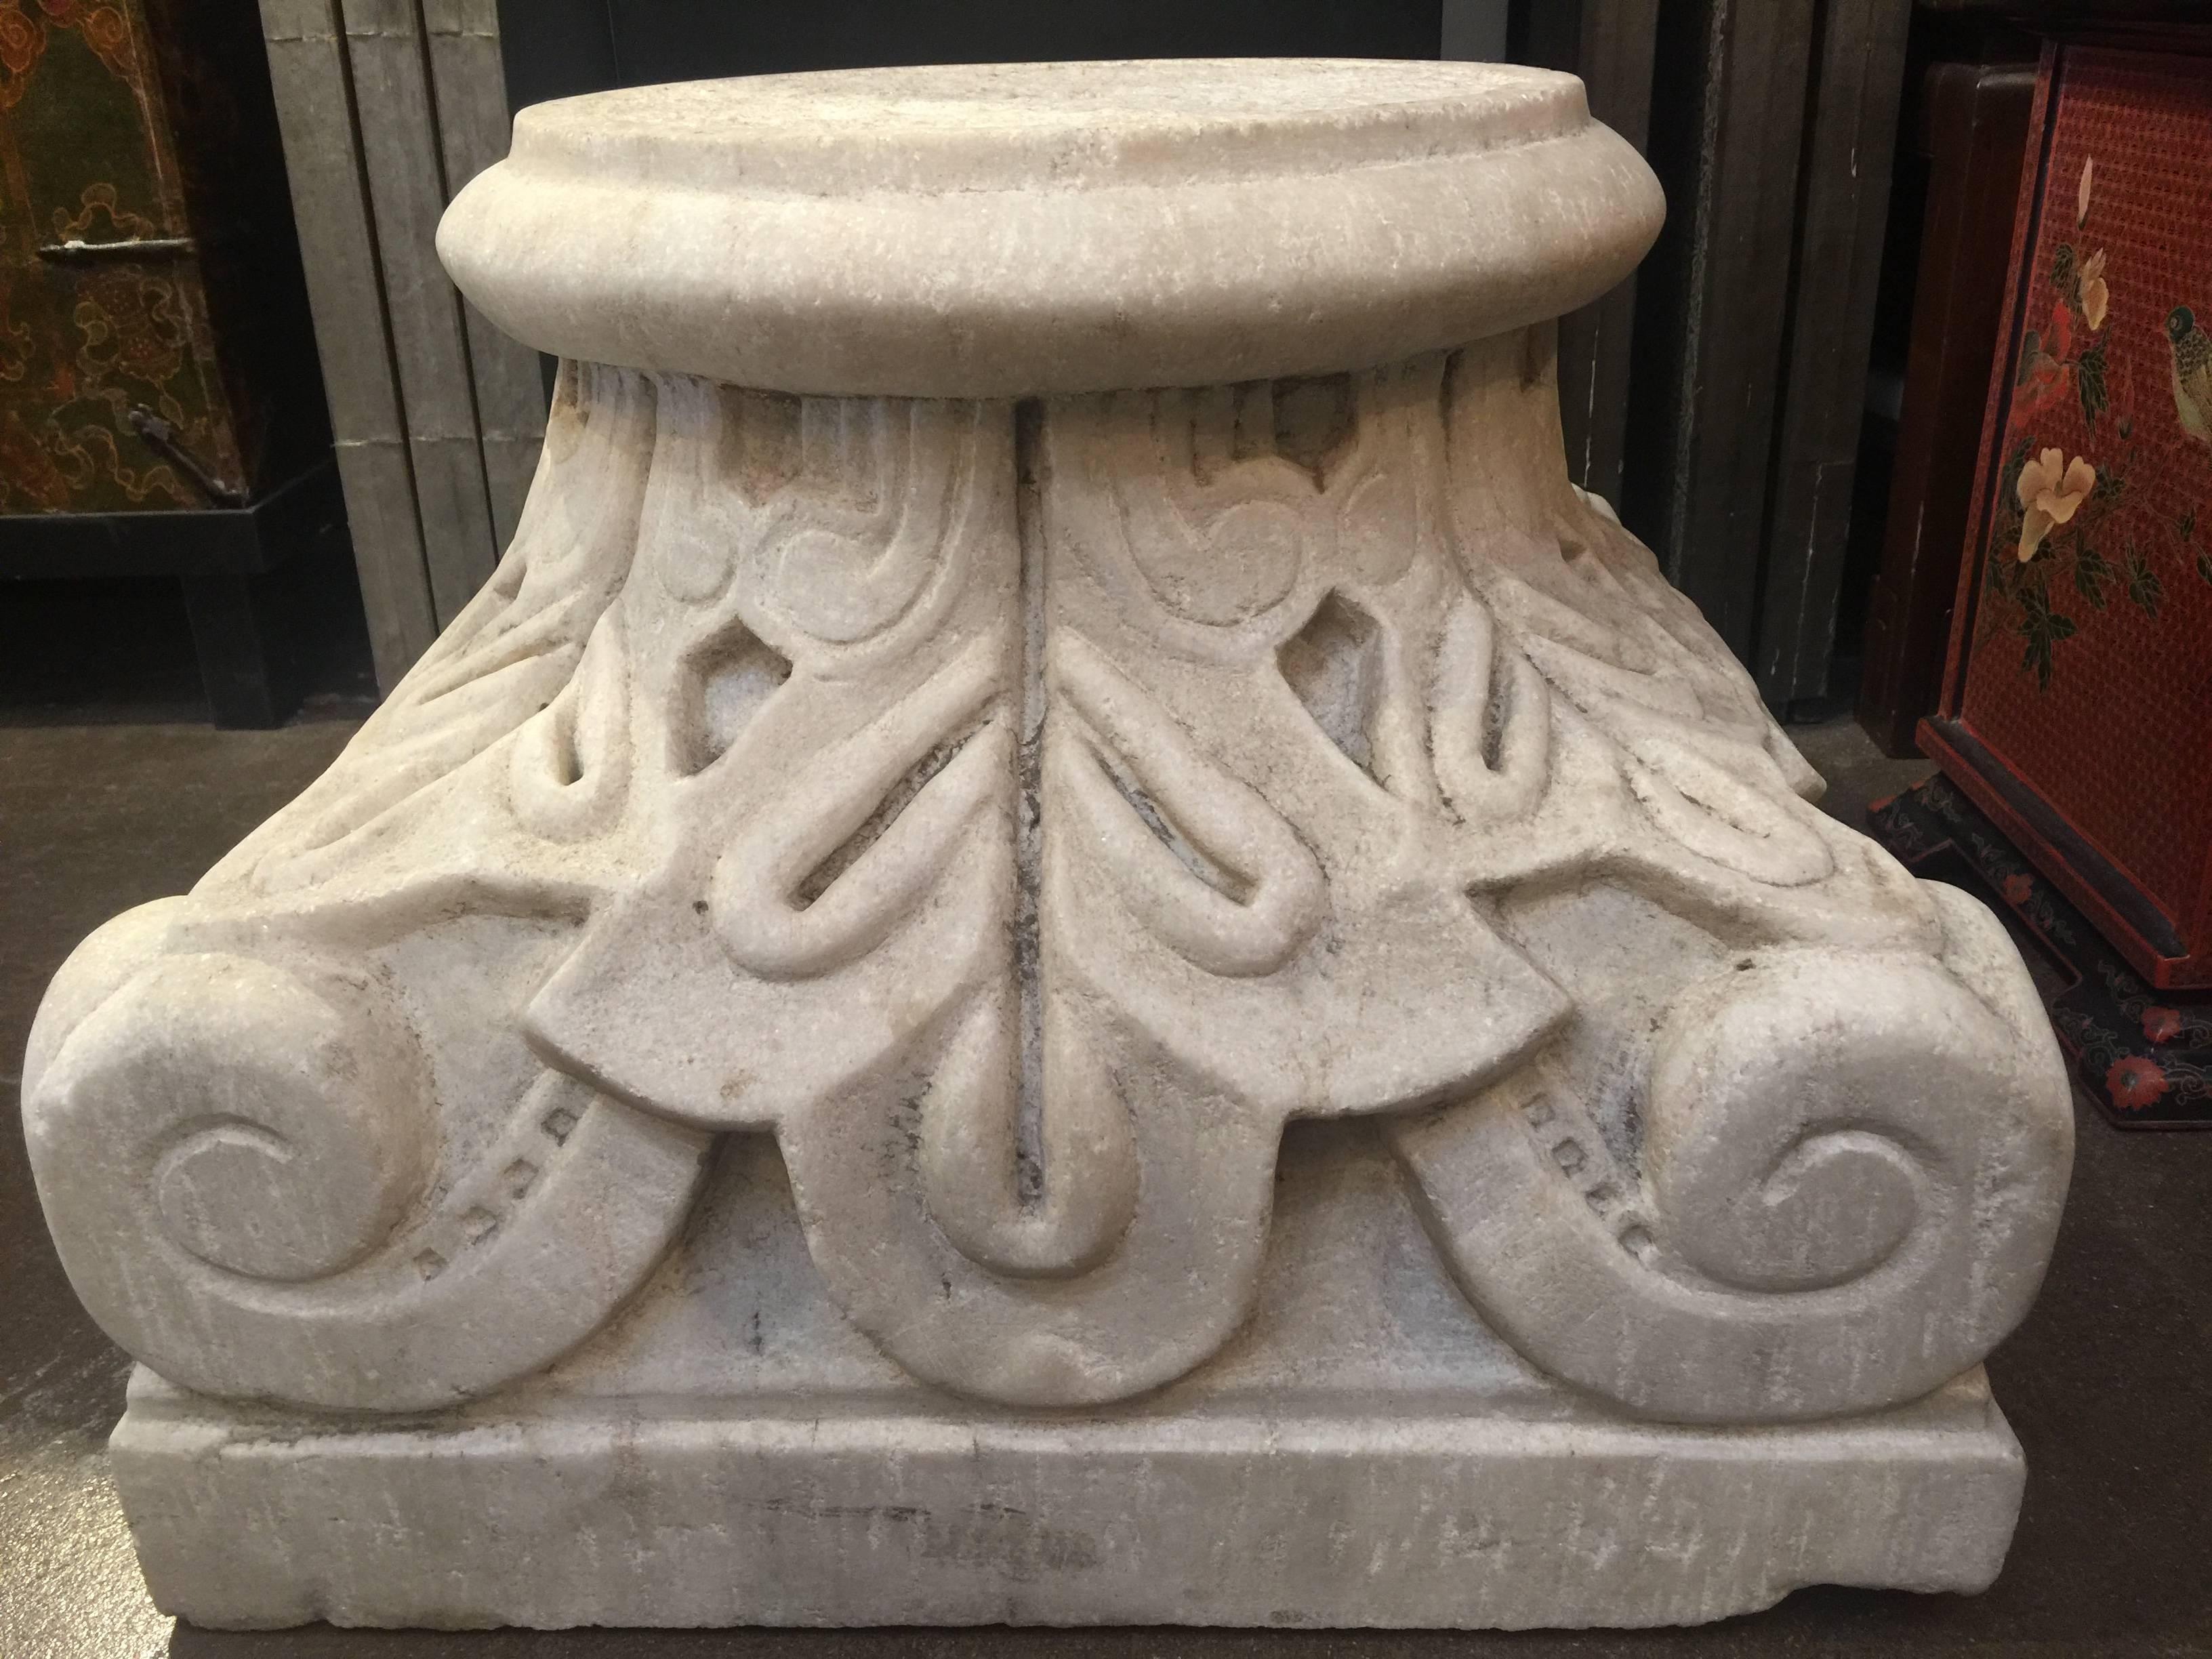 A stately and well carved marble Corinthian column capital, 19th century, Italy.
Presented and displayed inverted, with a typical decorative motif of acanthus and volute.
Perfect for the base of a side table or as a garden ornament. 

Measures: